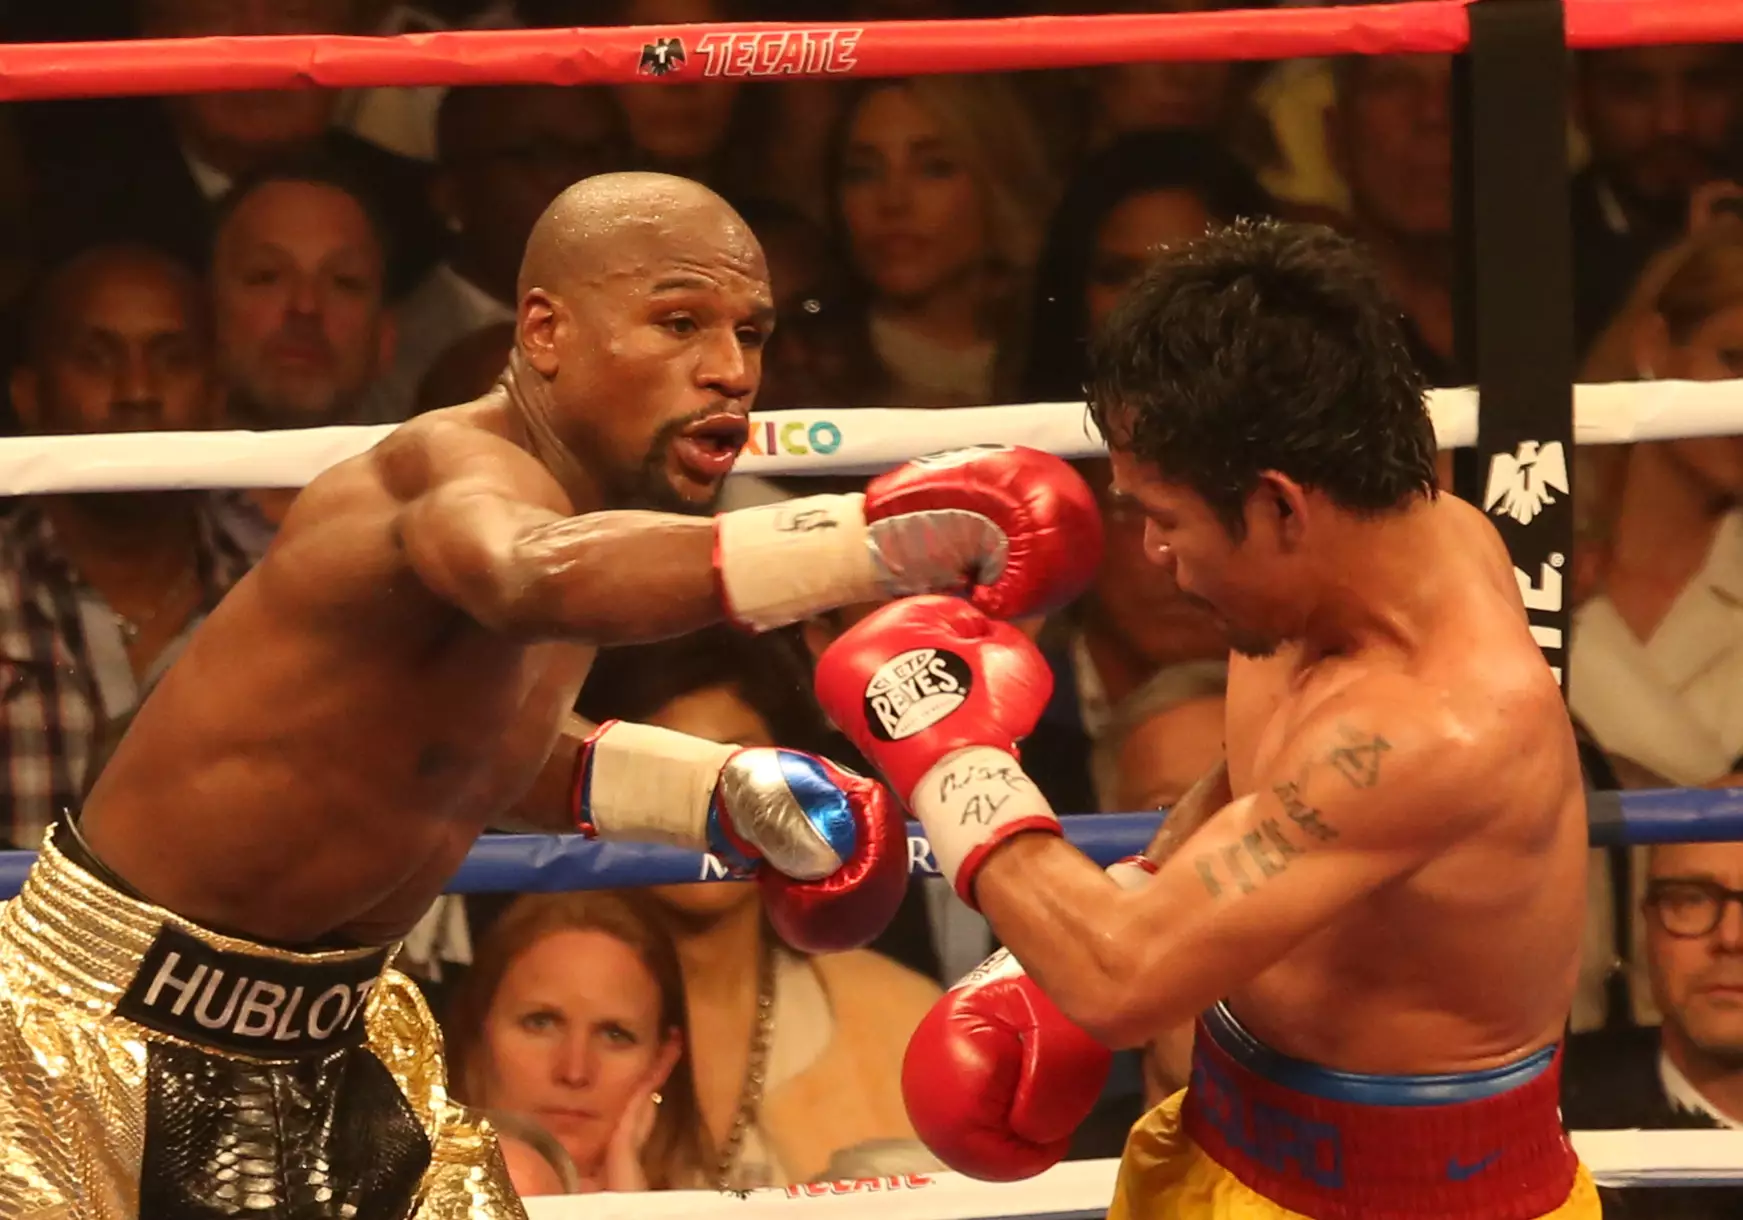 A rematch with Pacquiao might be the most popular choice for Mayweather. Image: PA Images